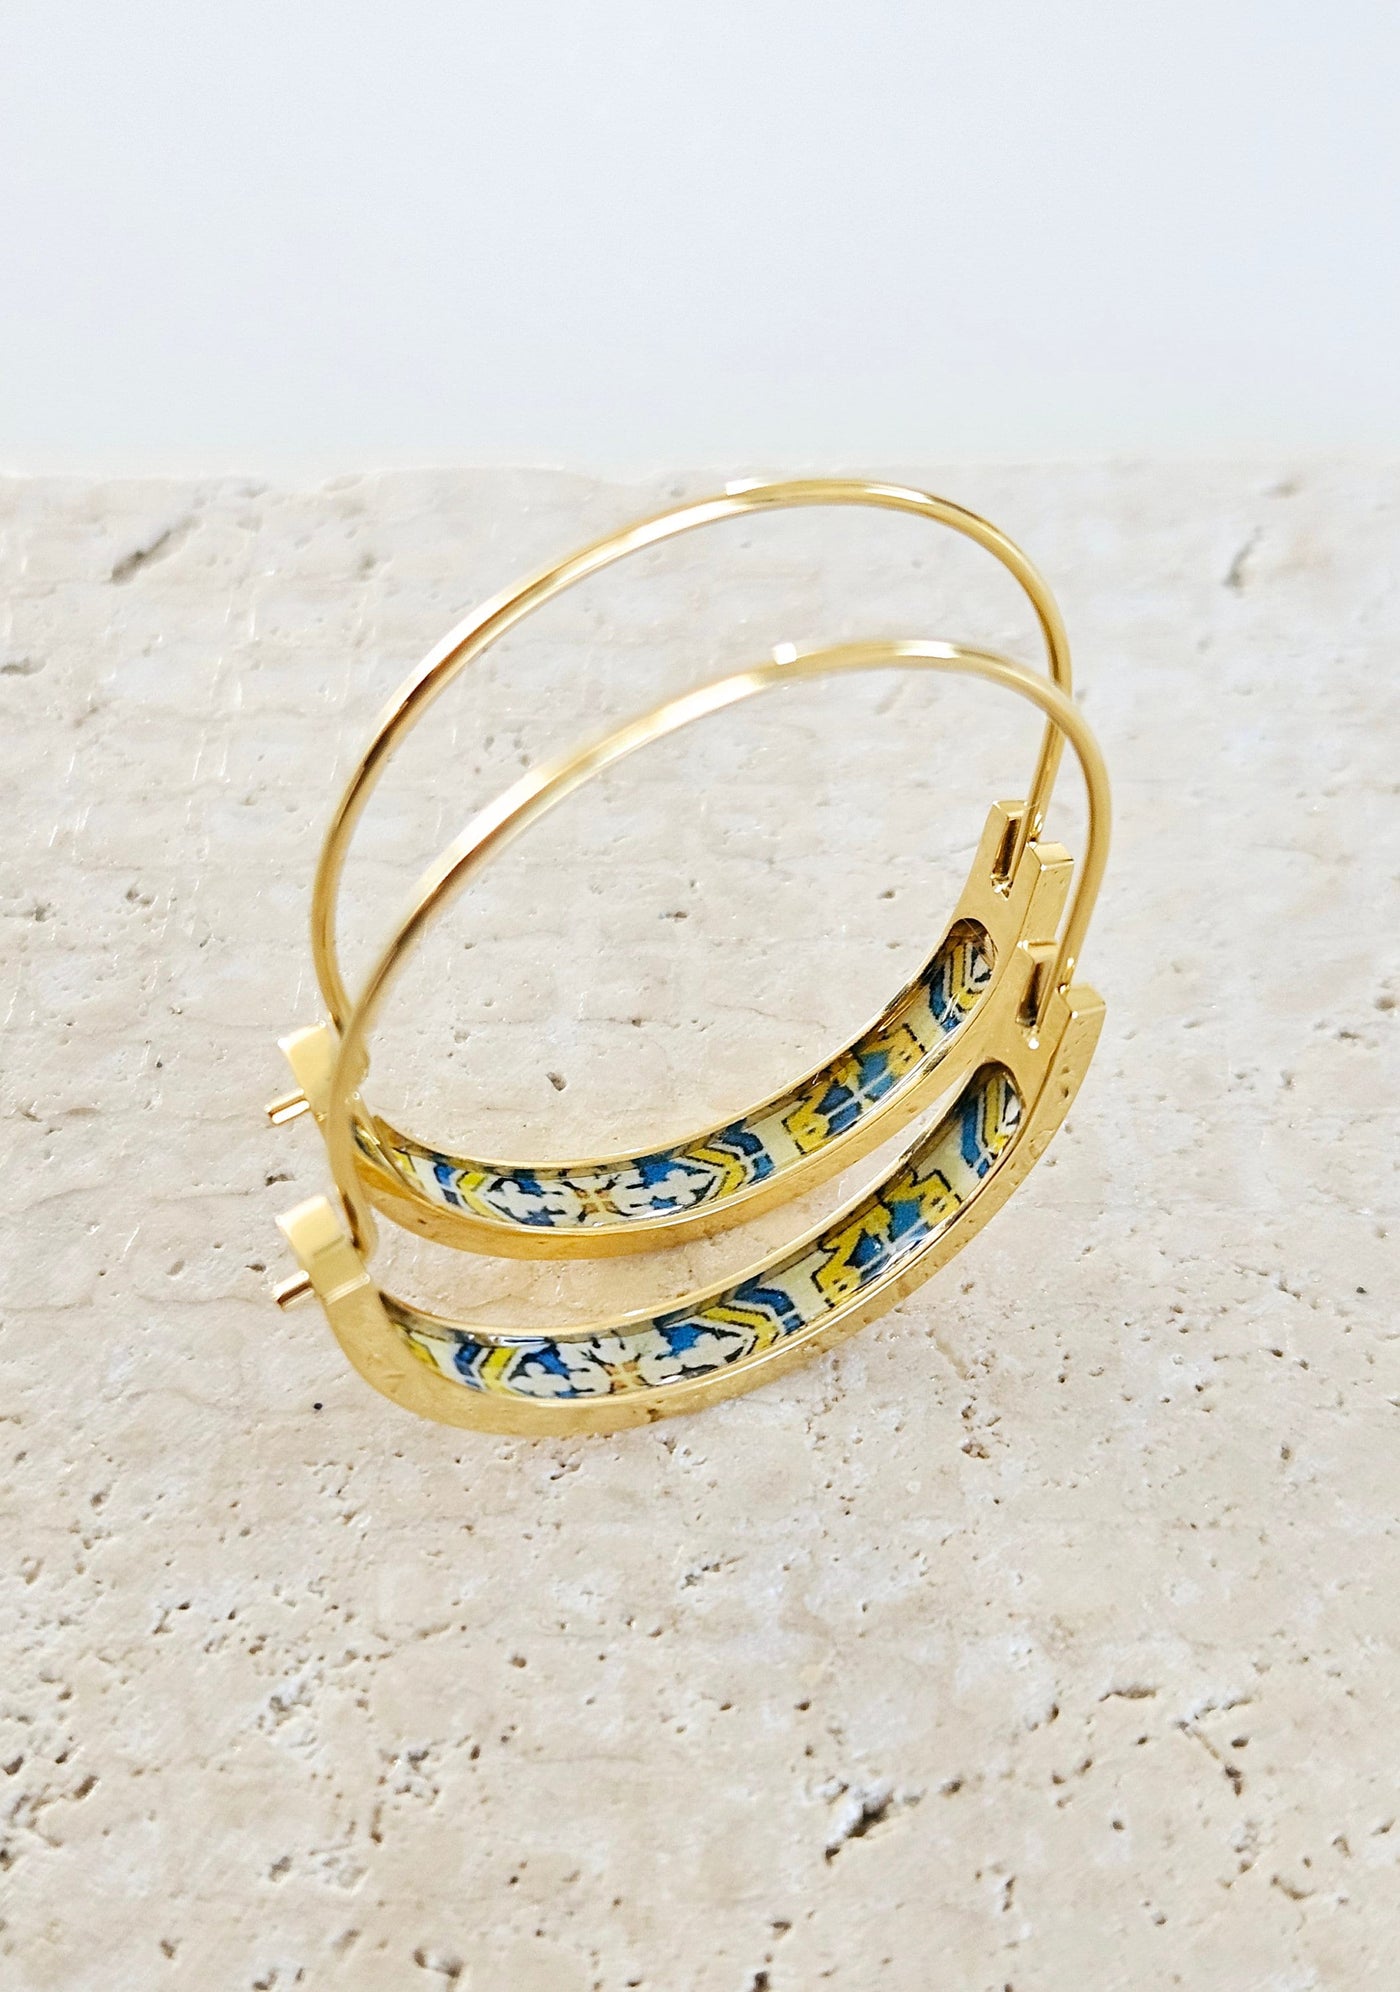 GOLD Flat 1.2'' HOOP Tile Earring Portugal Stainless STEEL Azulejo Delicate Hoop Historic Gold Jewelry Travel Gift Portuguese Handmade Gift